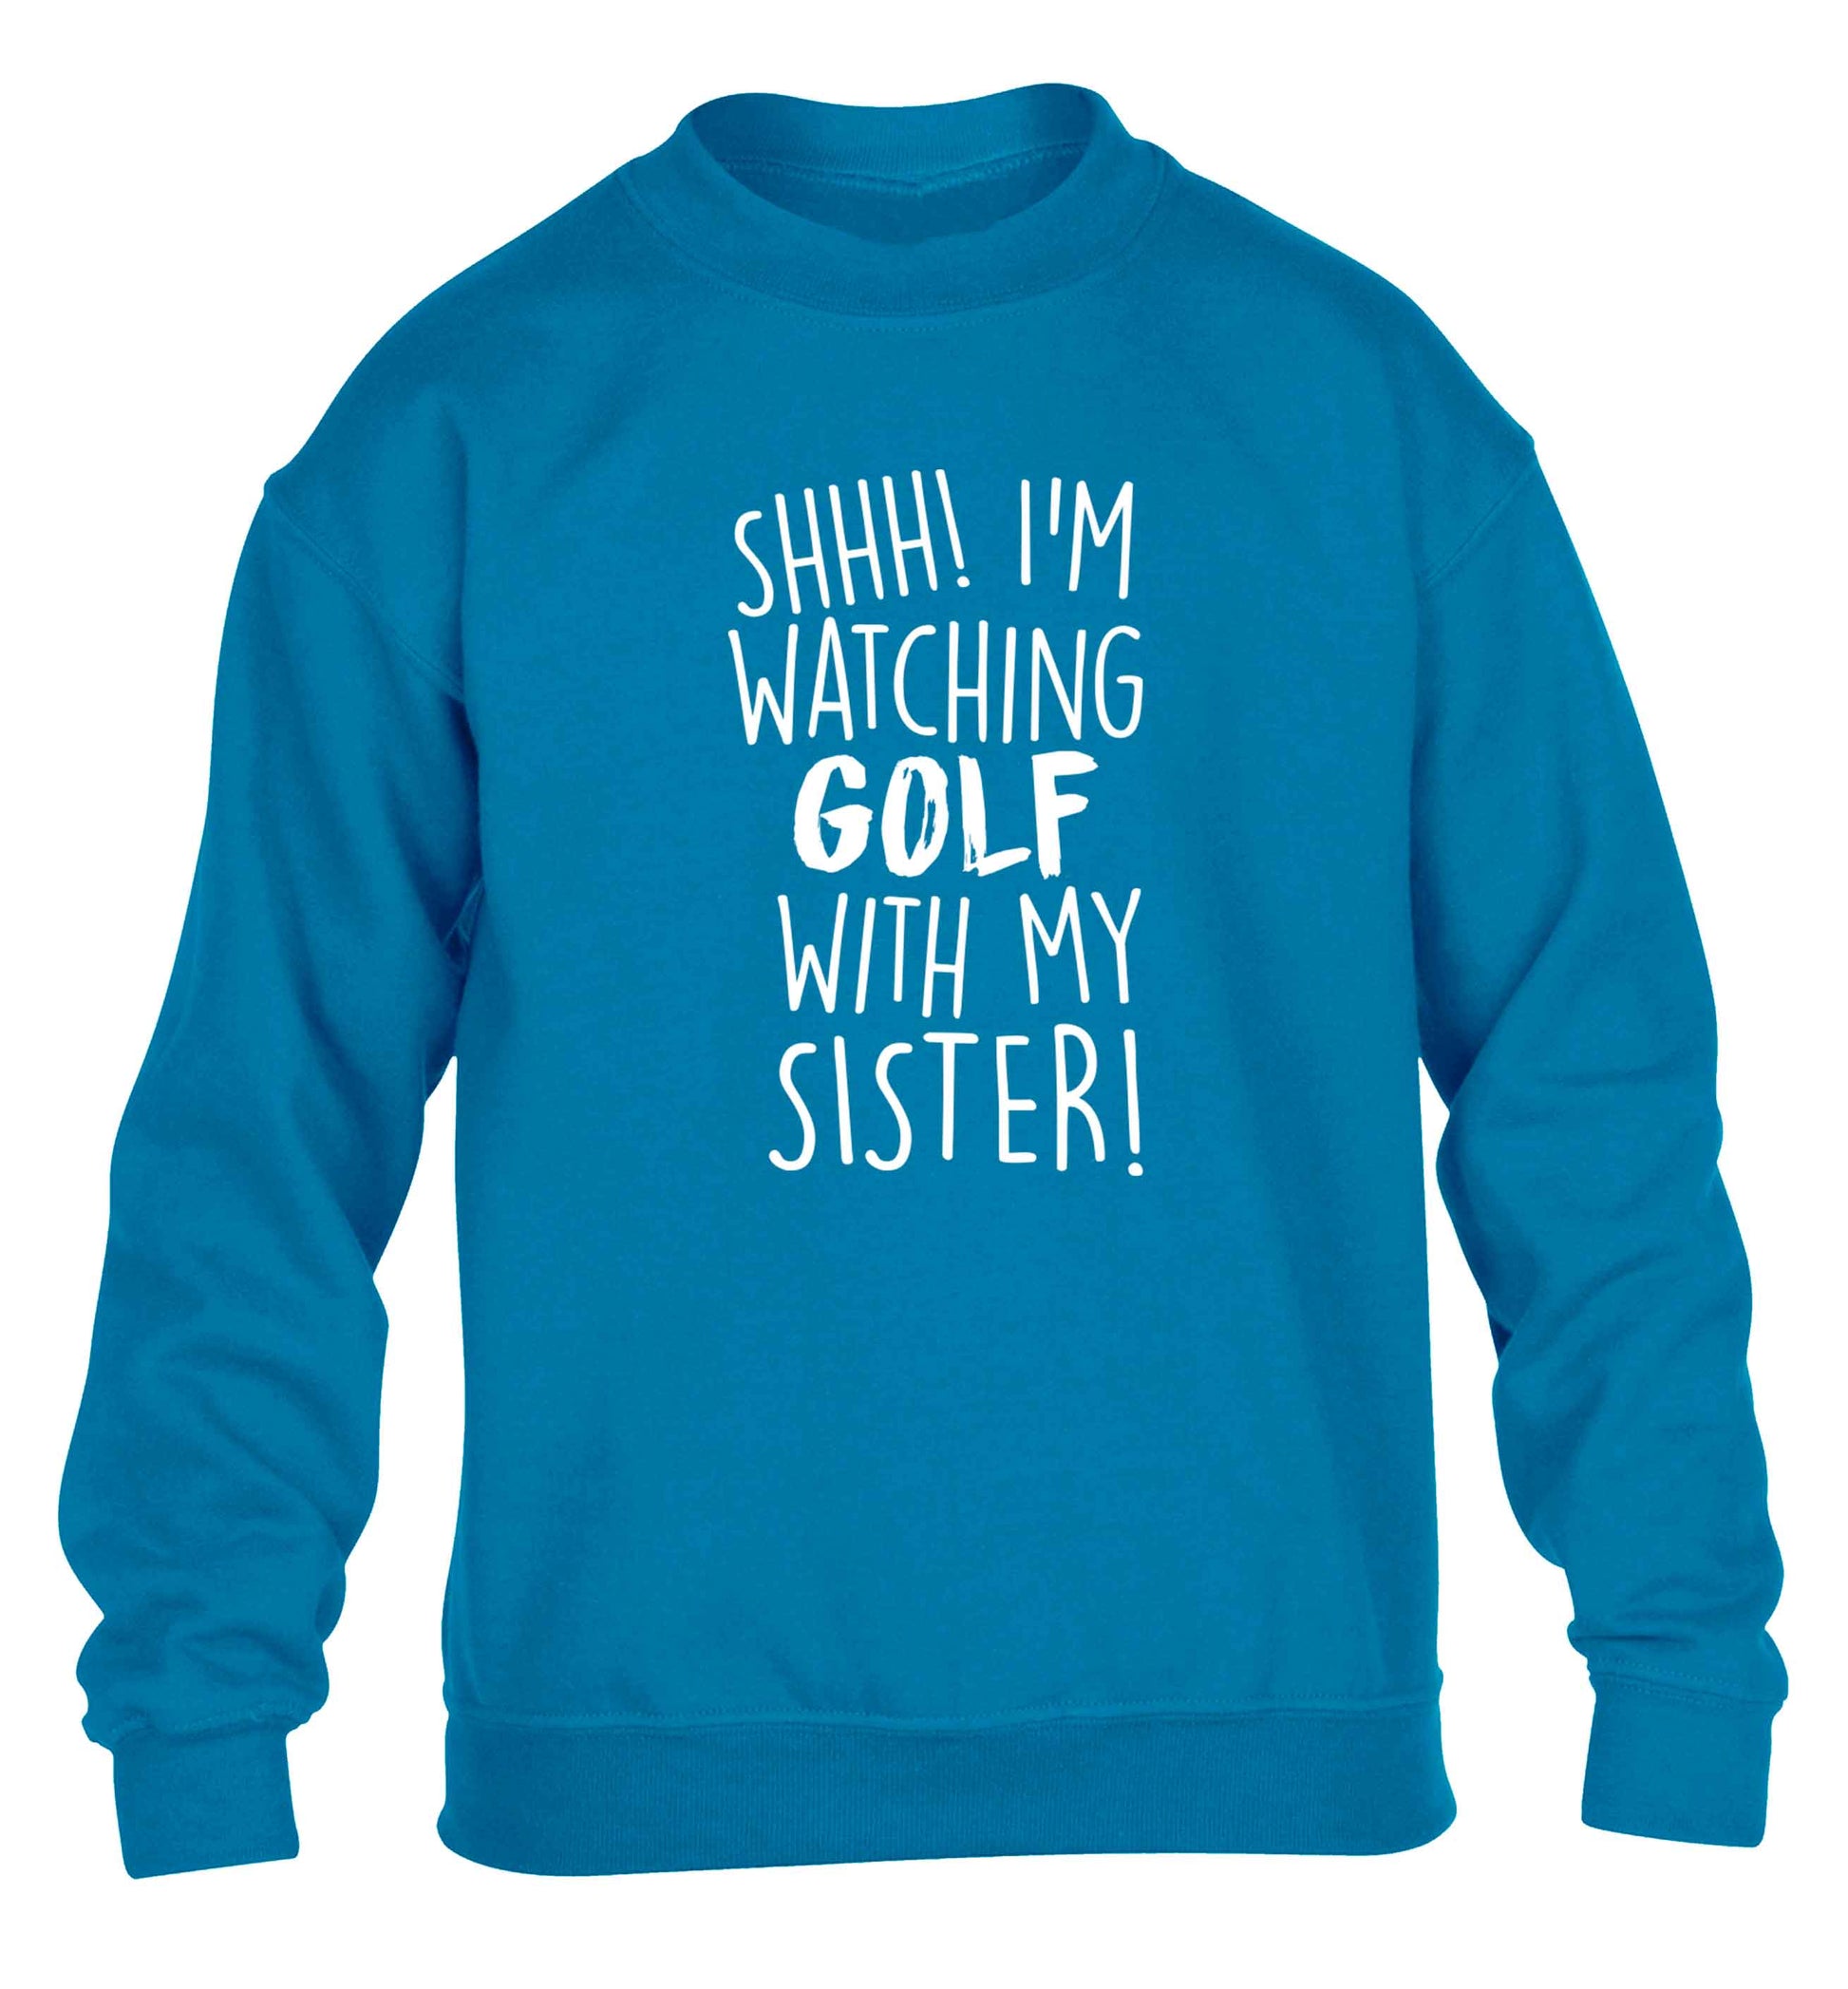 Shh I'm watching golf with my sister children's blue sweater 12-13 Years